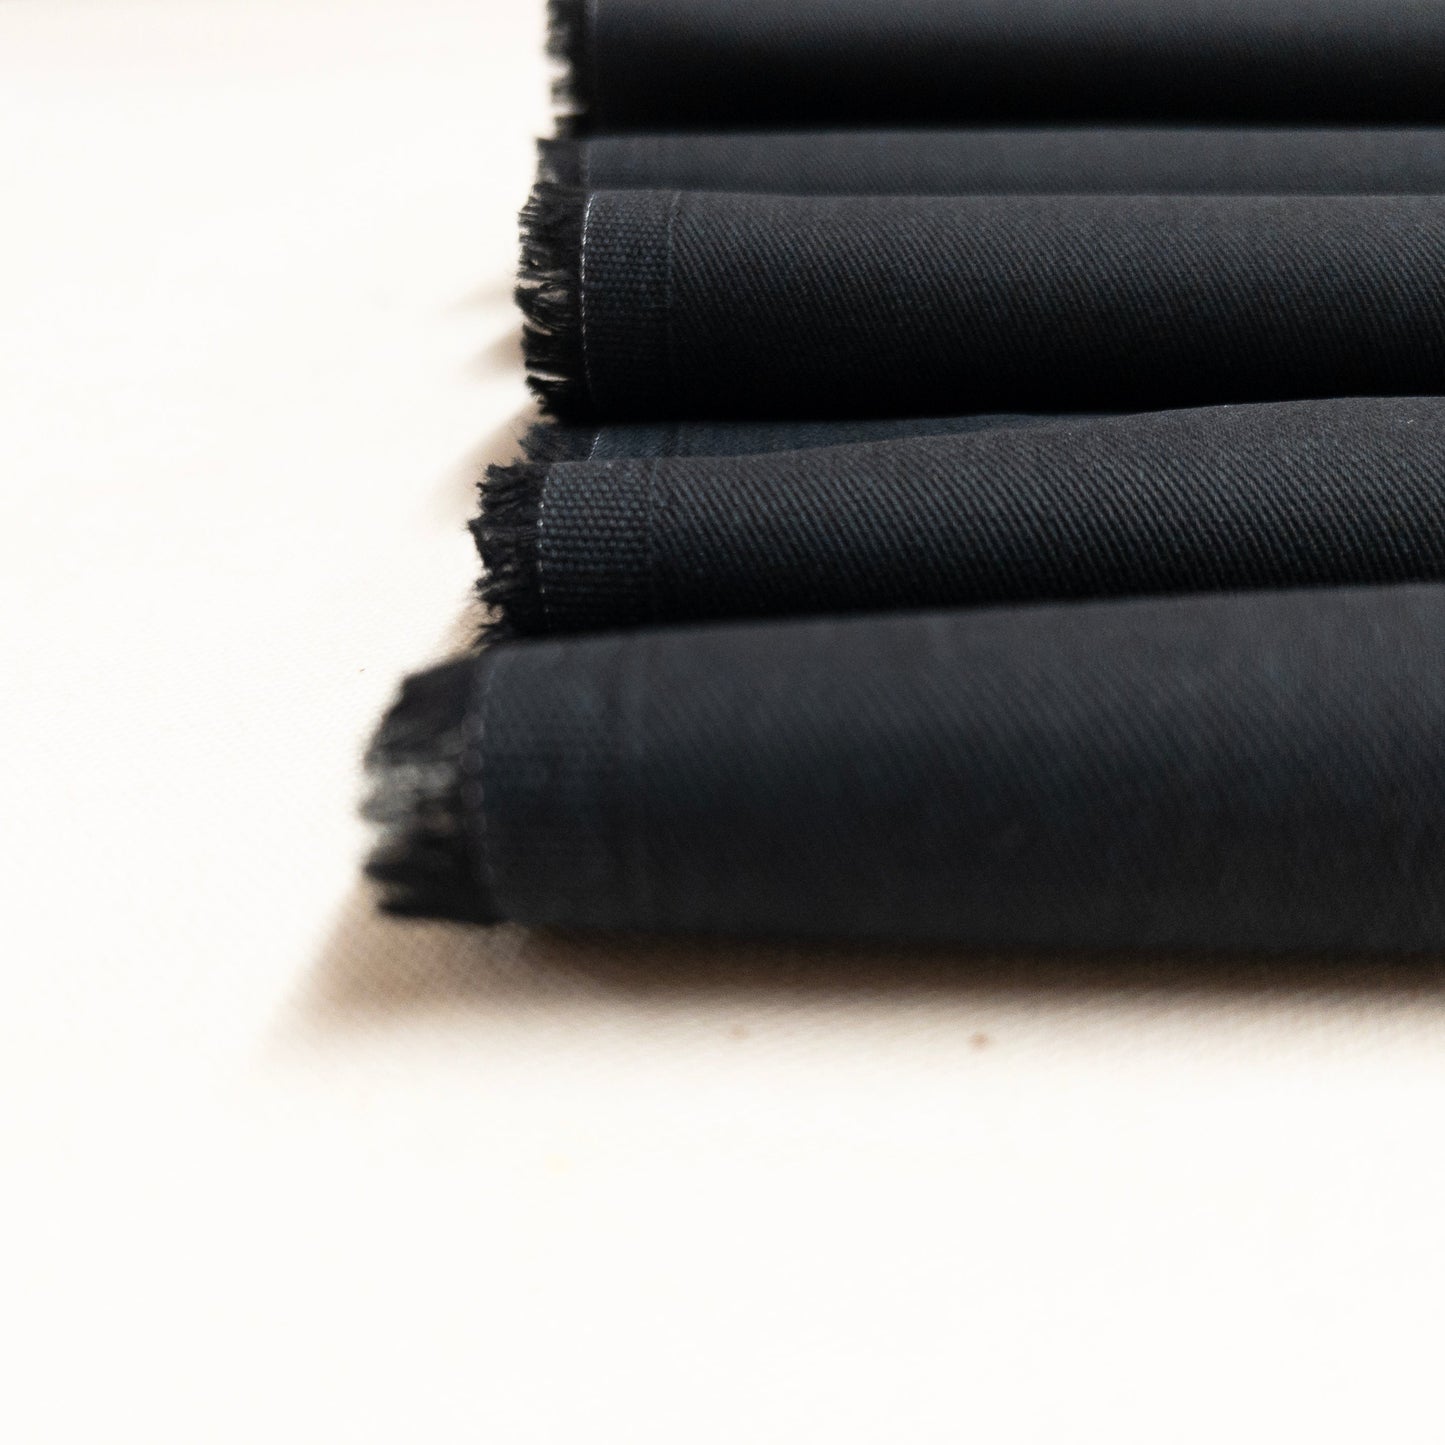 Remnant: Sanded Cotton Twill in Black 1 1/4 yards